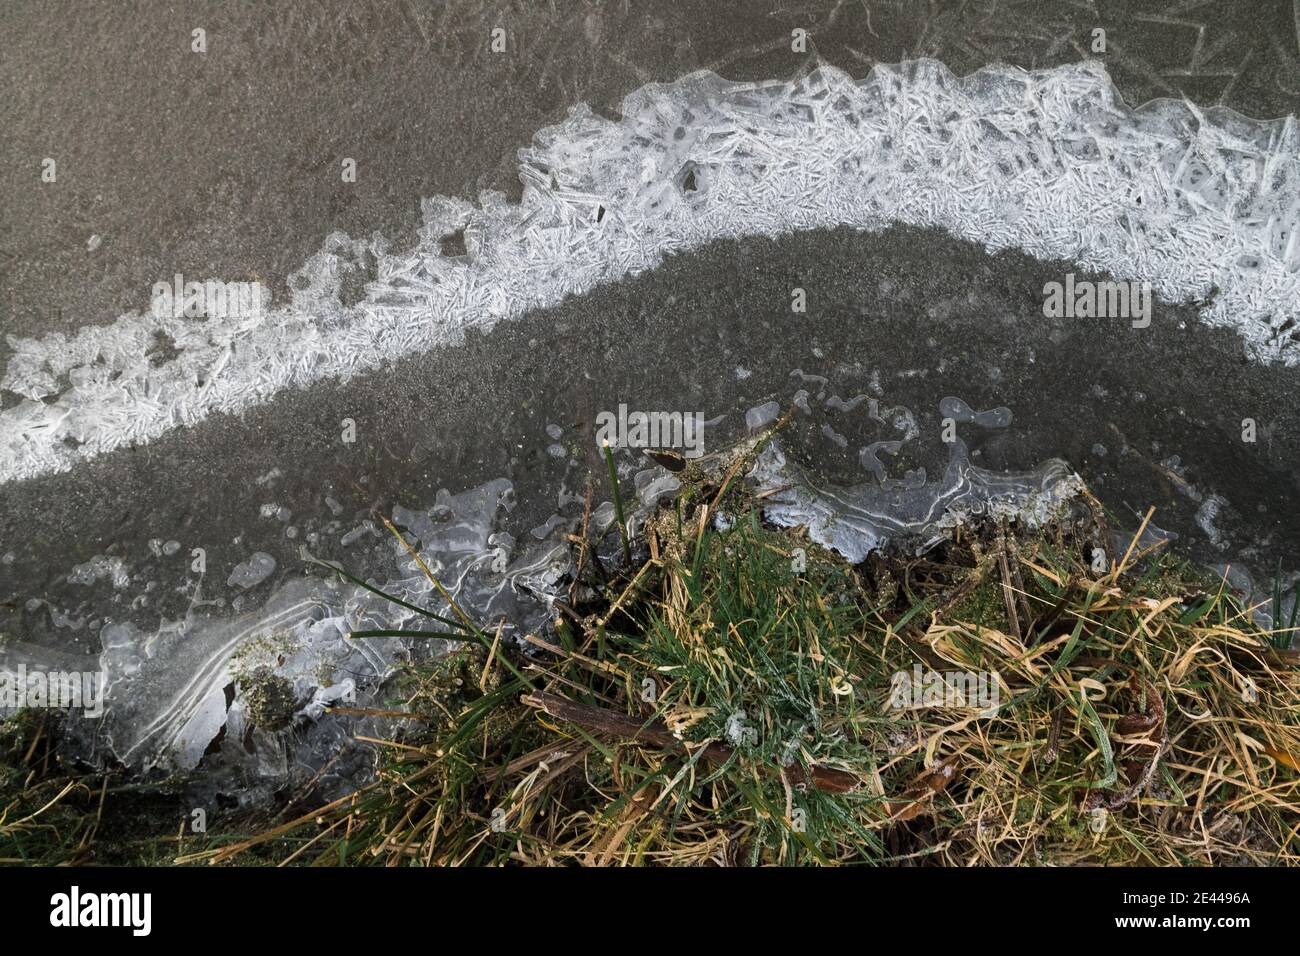 Frozen trench shown from the bird's eye view Stock Photo